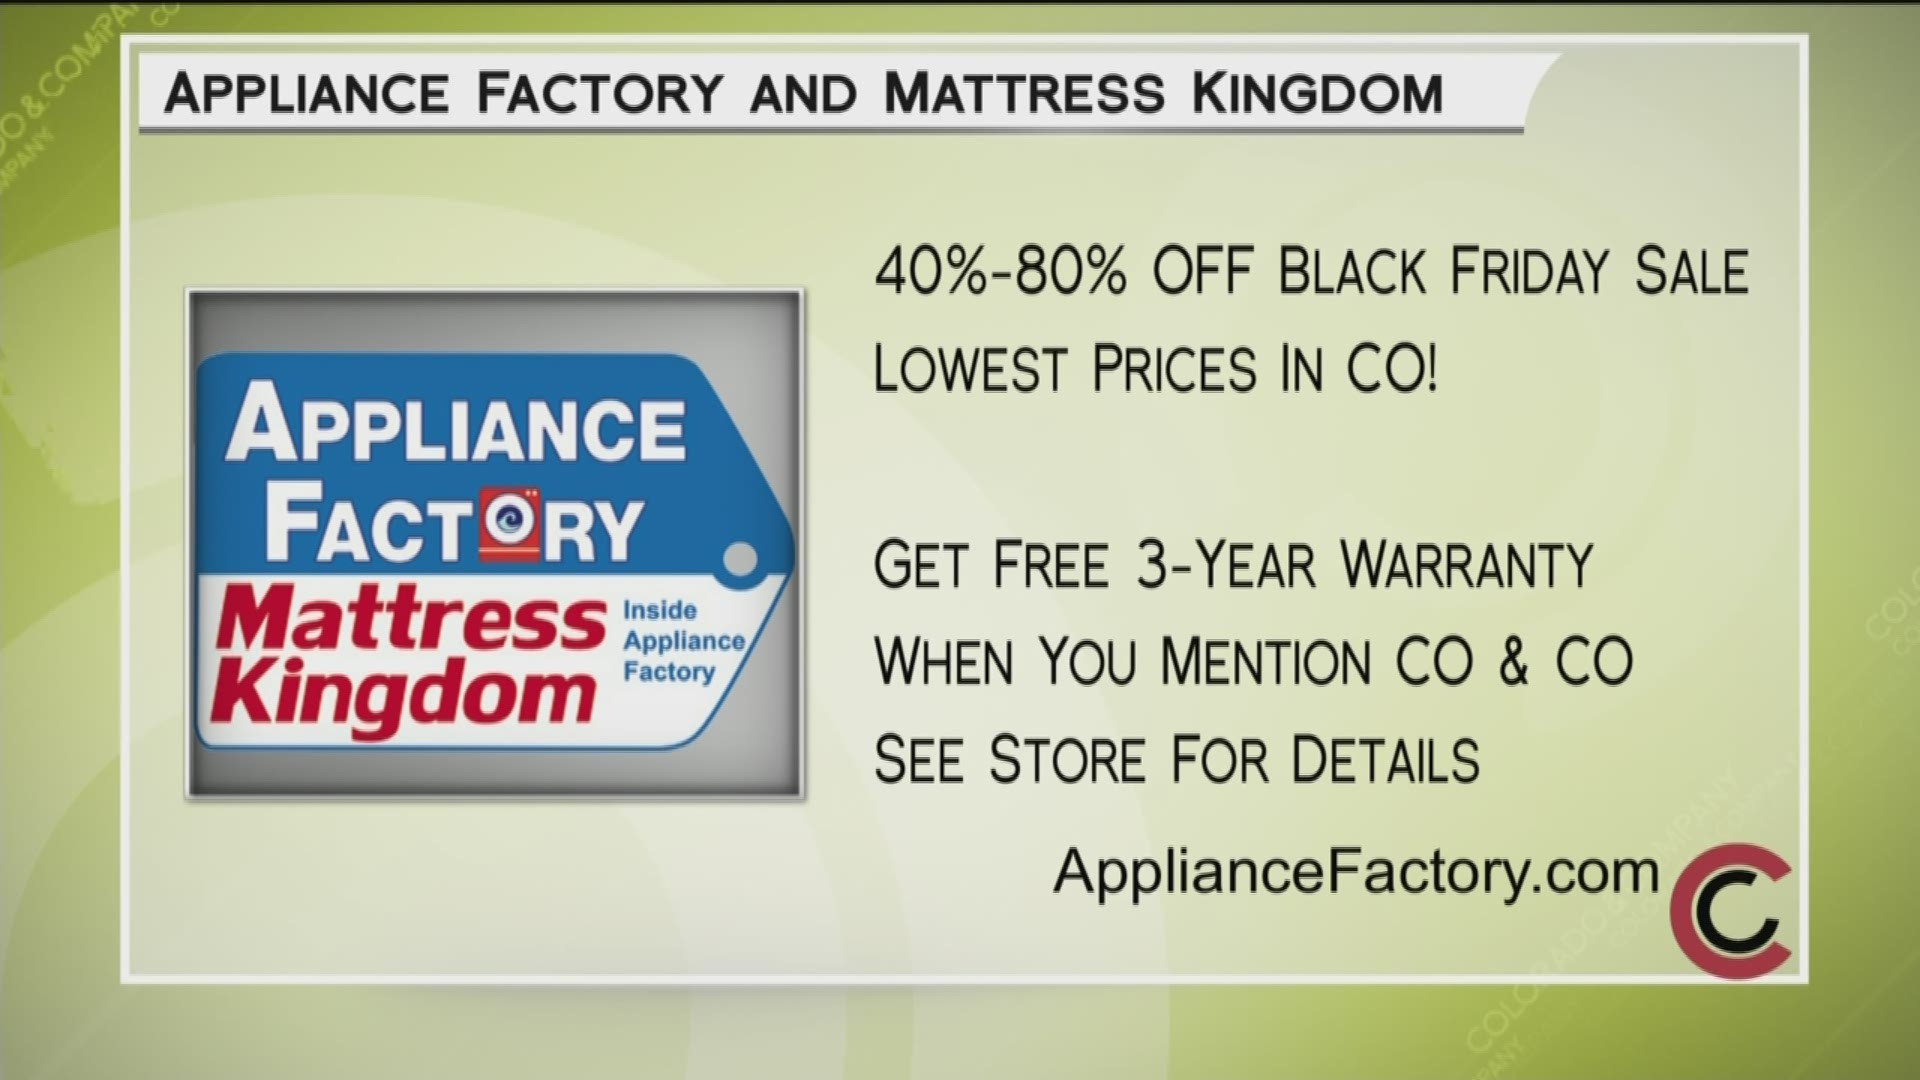 Take advantage of Appliance Factory’s unbeatable 40-80% off sale! There are 23 locations across the state. Find one near you at www.ApplianceFactory.com.